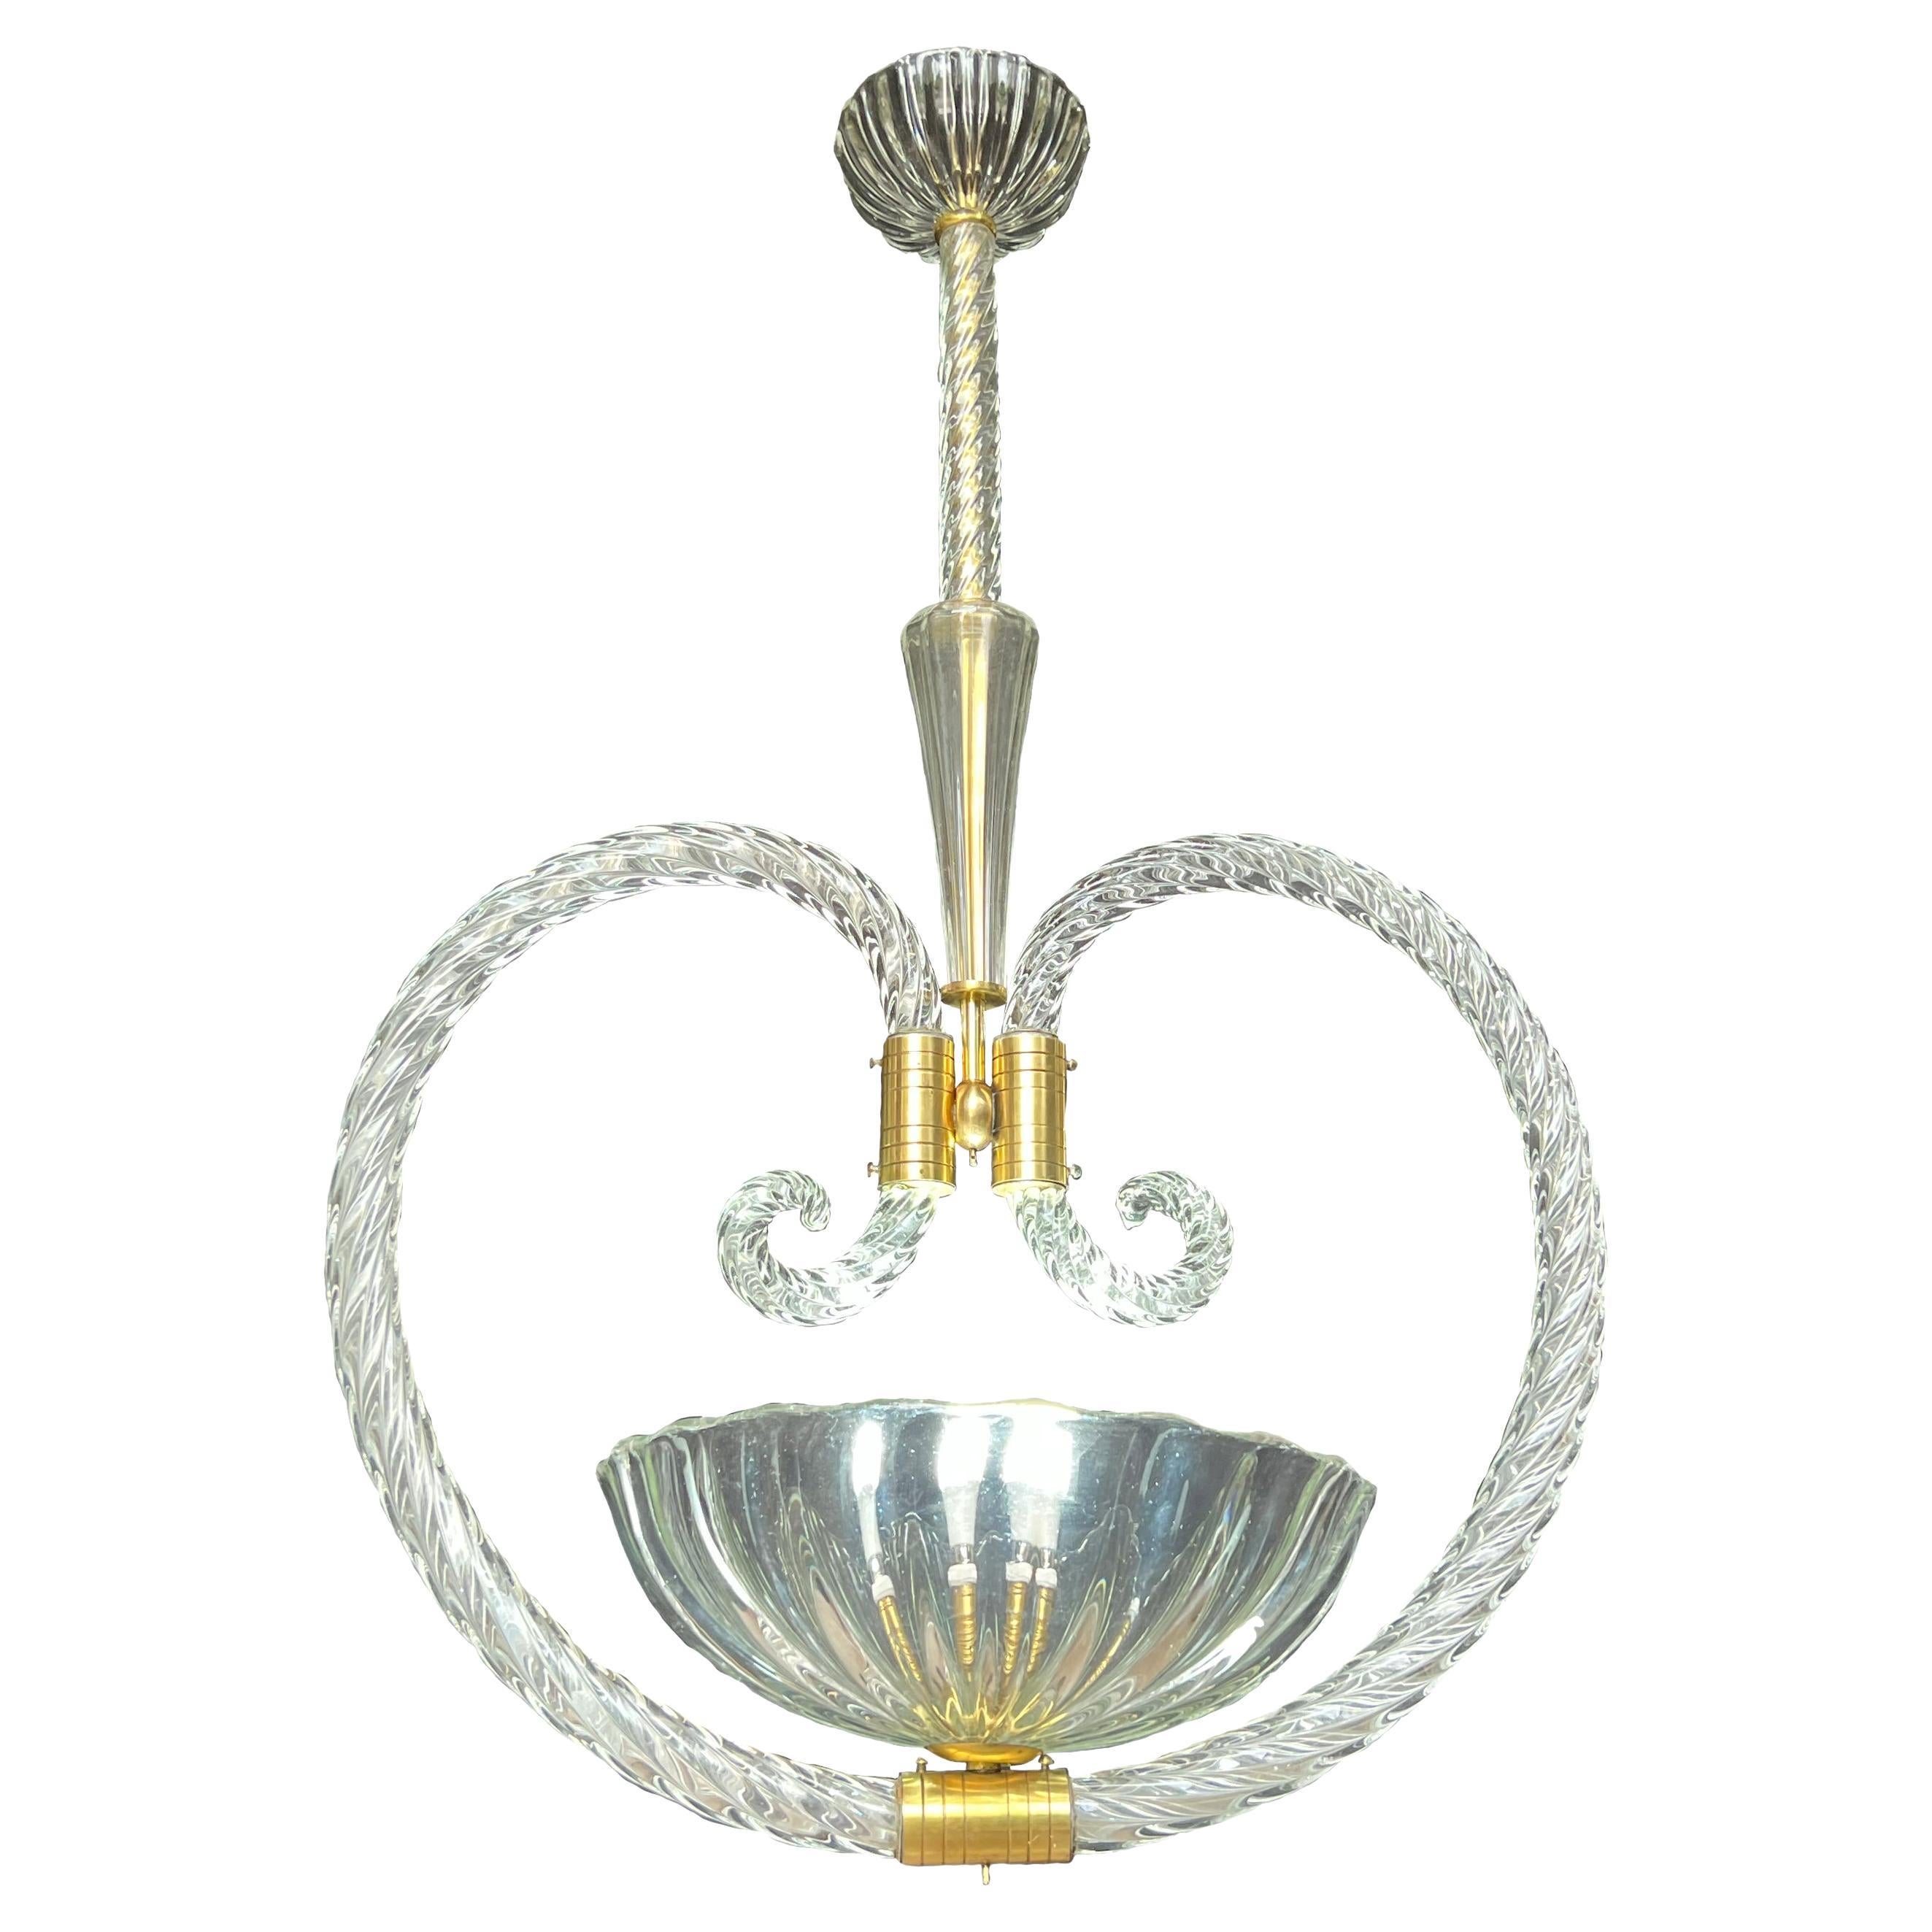 Mid-20th Century Charming Chandelier by Ercole Barovier, Murano, 1940